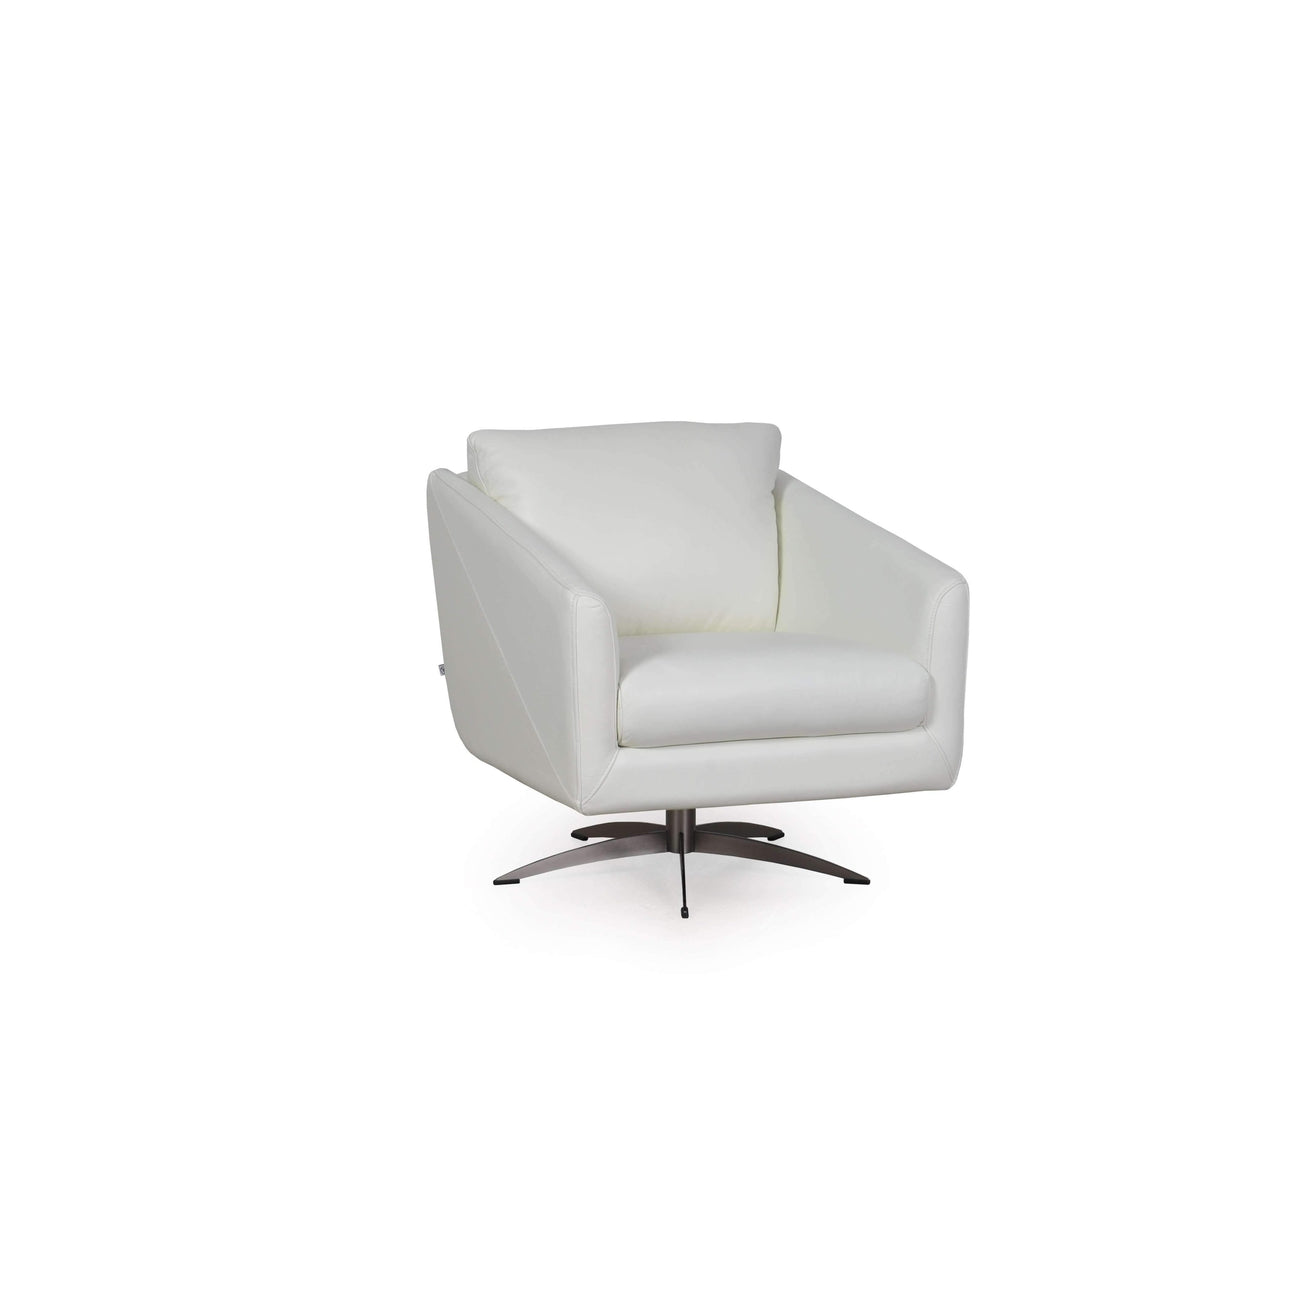 Classic Modern Chair-Moroni Leather-MORONI-530061296-Lounge Chairs-1-France and Son